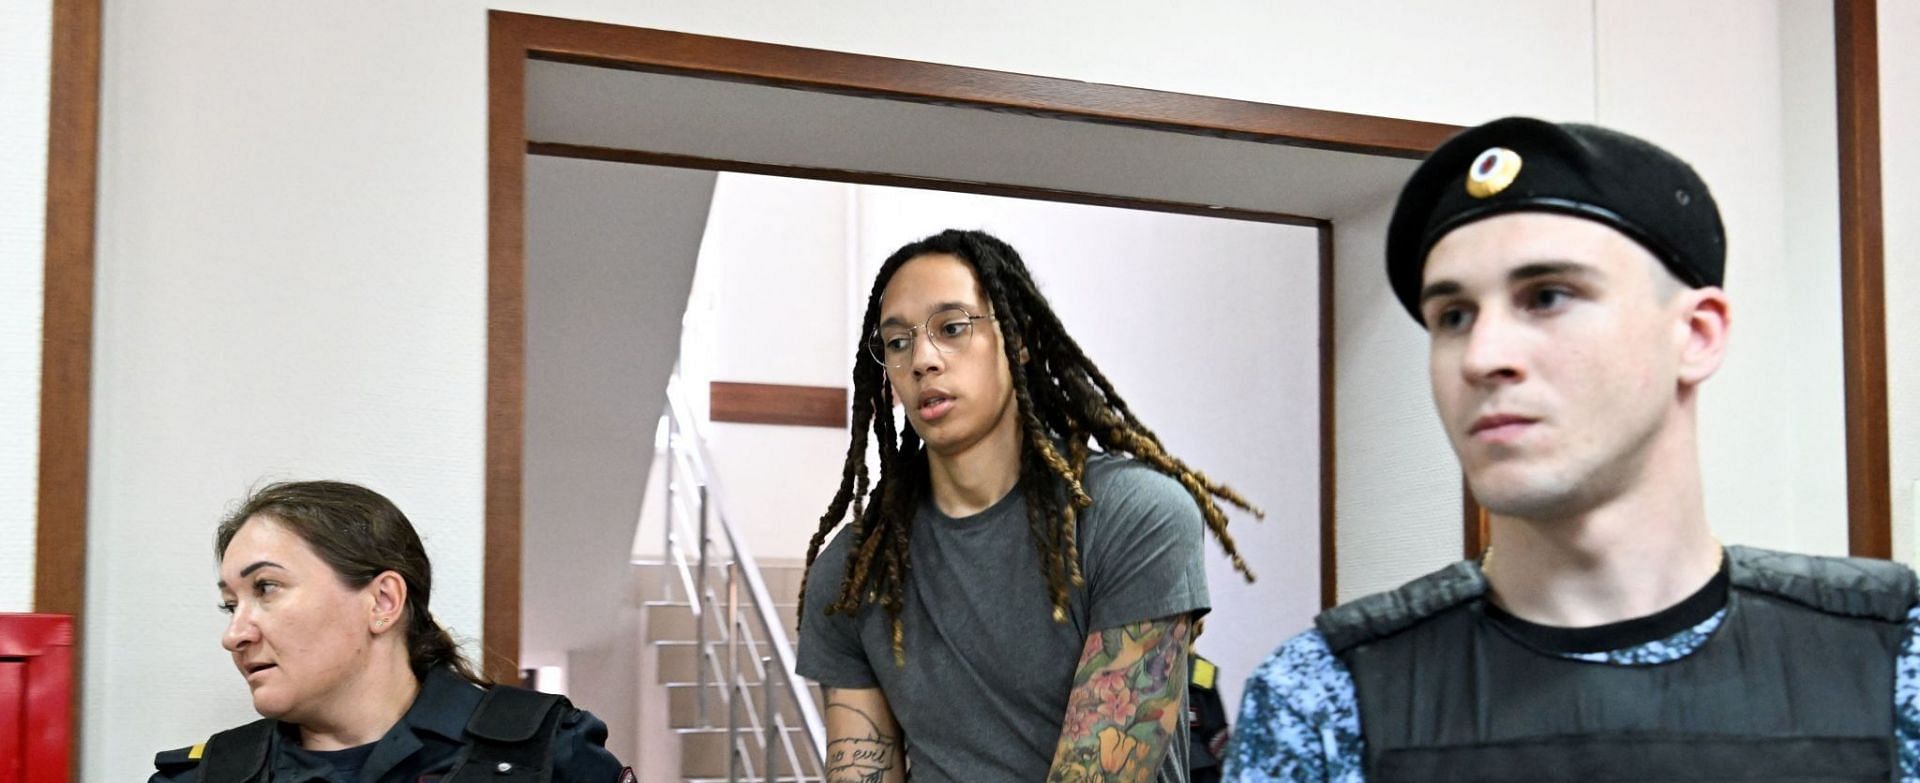 Brittney Griner can face up to 10 years in a Russian prison following her guilty plea (Image via Getty Images)